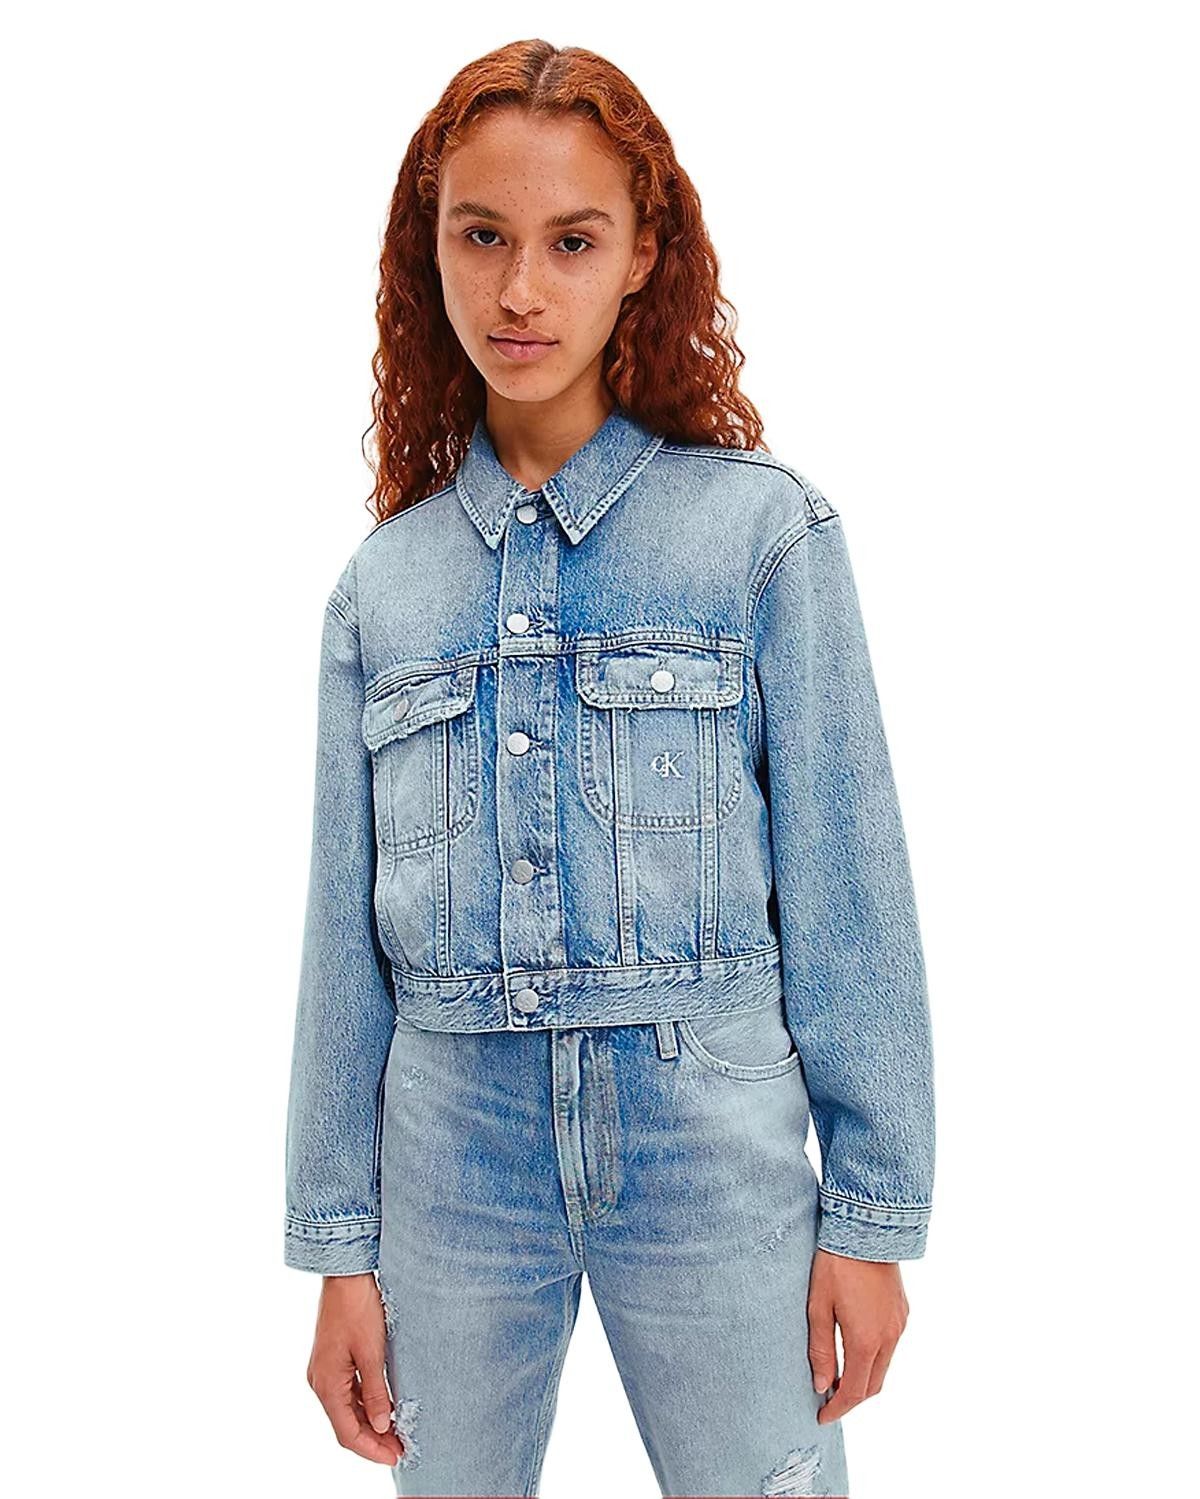 Brand: Calvin Klein Jeans
Gender: Women
Type: Jackets
Season: Spring/Summer

PRODUCT DETAIL
• Color: blue
• Fastening: buttons
• Sleeves: long
• Collar: classic
• Pockets: front pockets

COMPOSITION AND MATERIAL
• Composition: -100% cotton 
•  Washing: machine wash at 30°